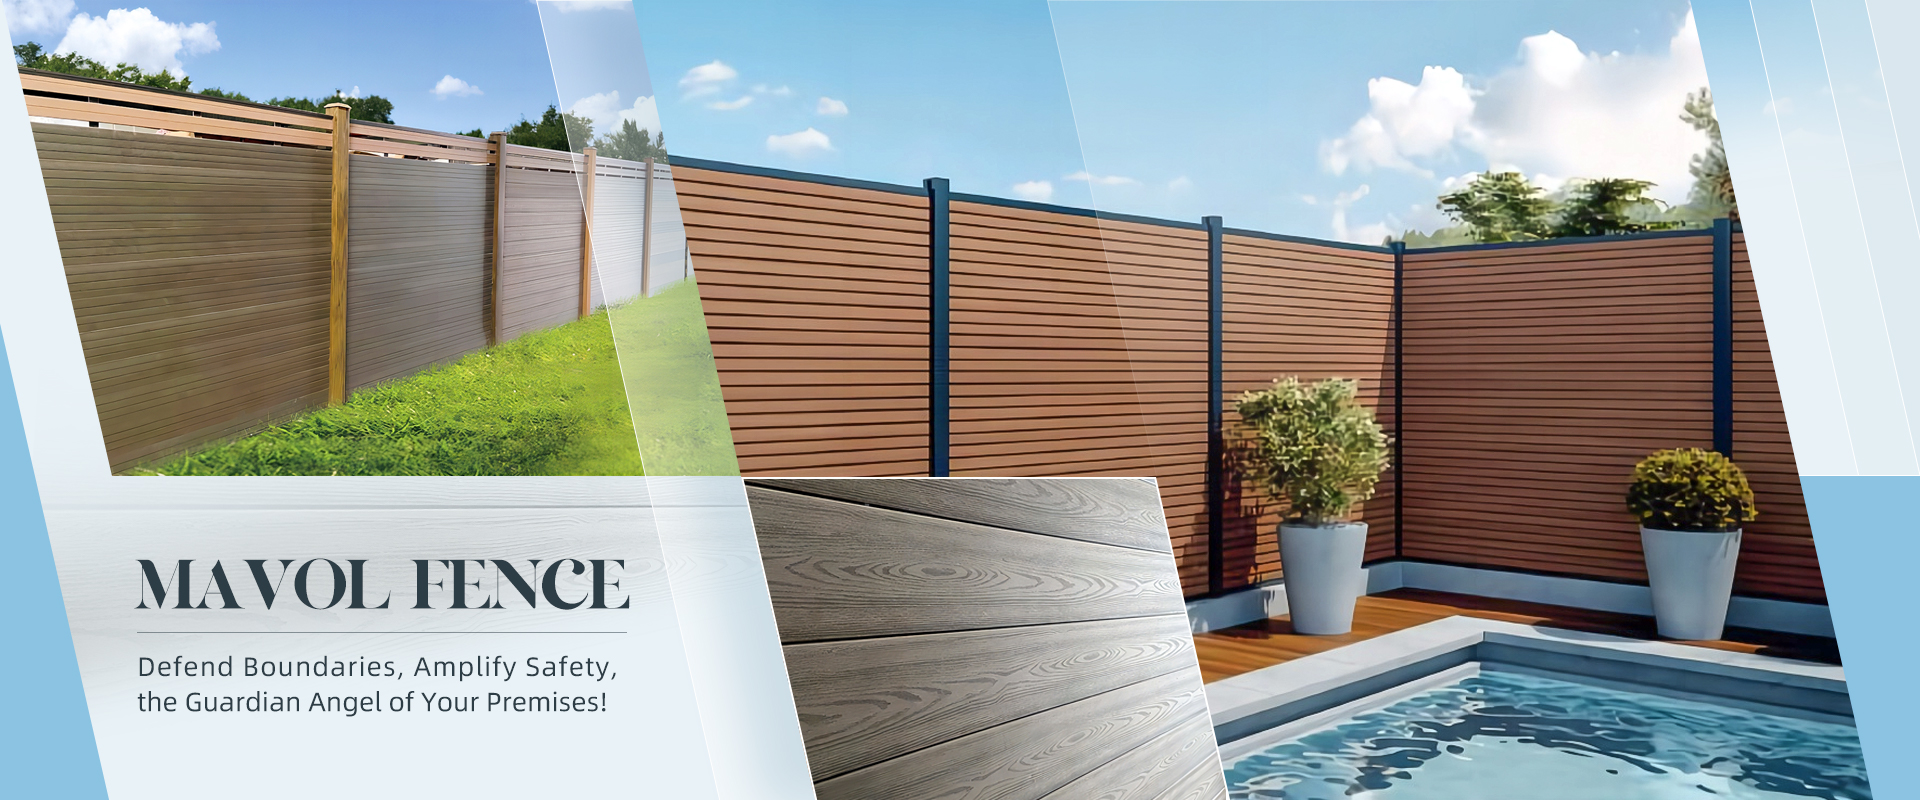 Outdoor Wpc Fence Panels